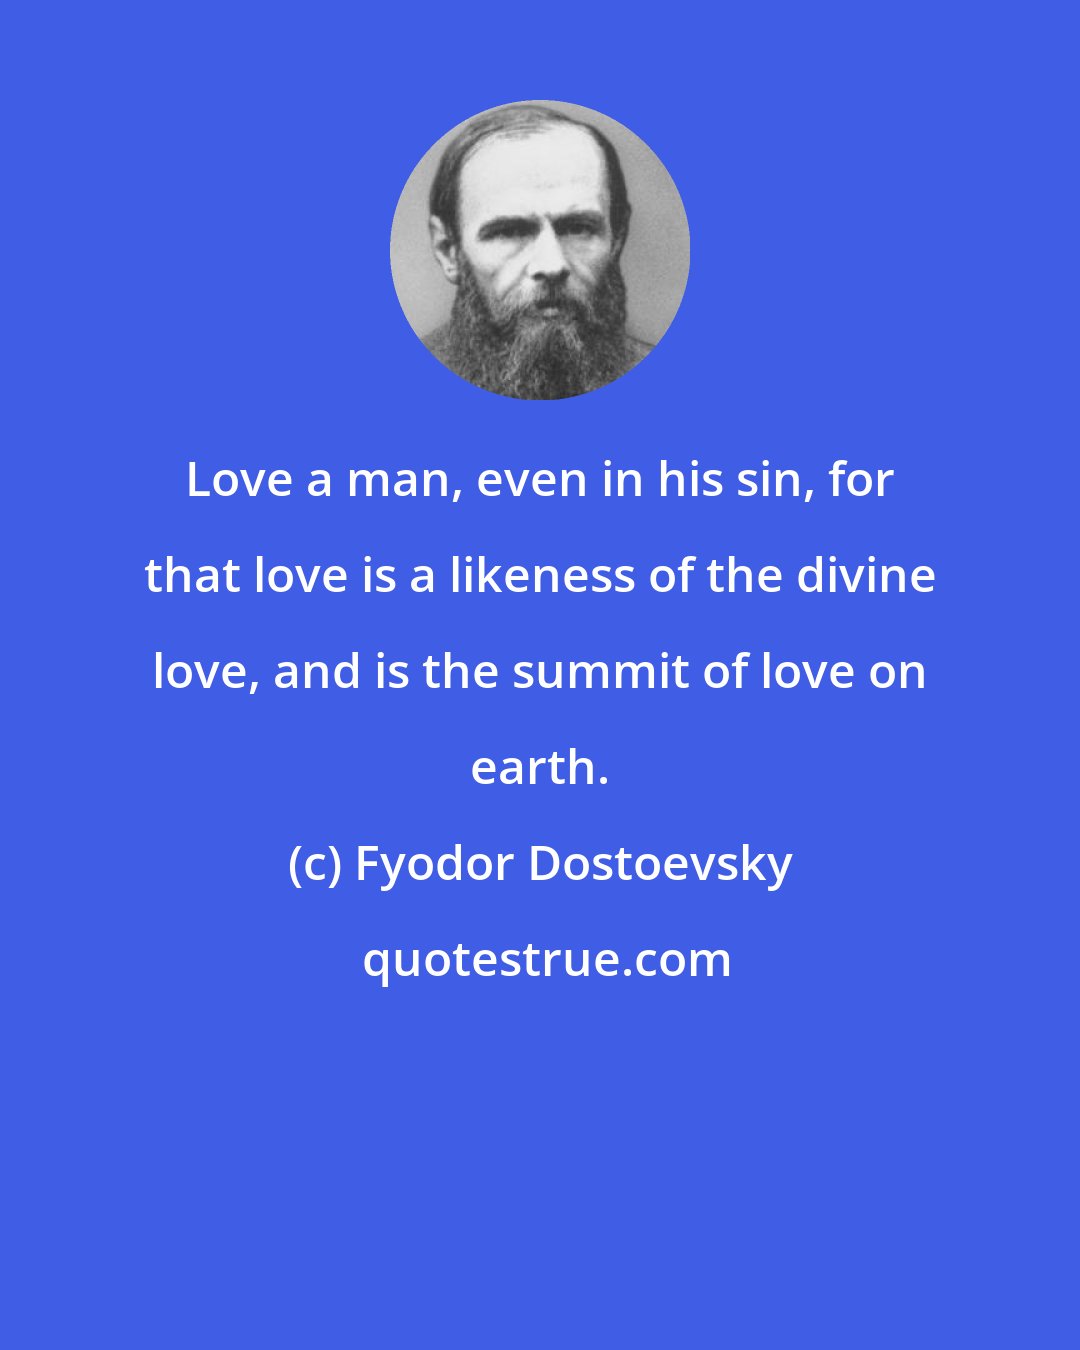 Fyodor Dostoevsky: Love a man, even in his sin, for that love is a likeness of the divine love, and is the summit of love on earth.